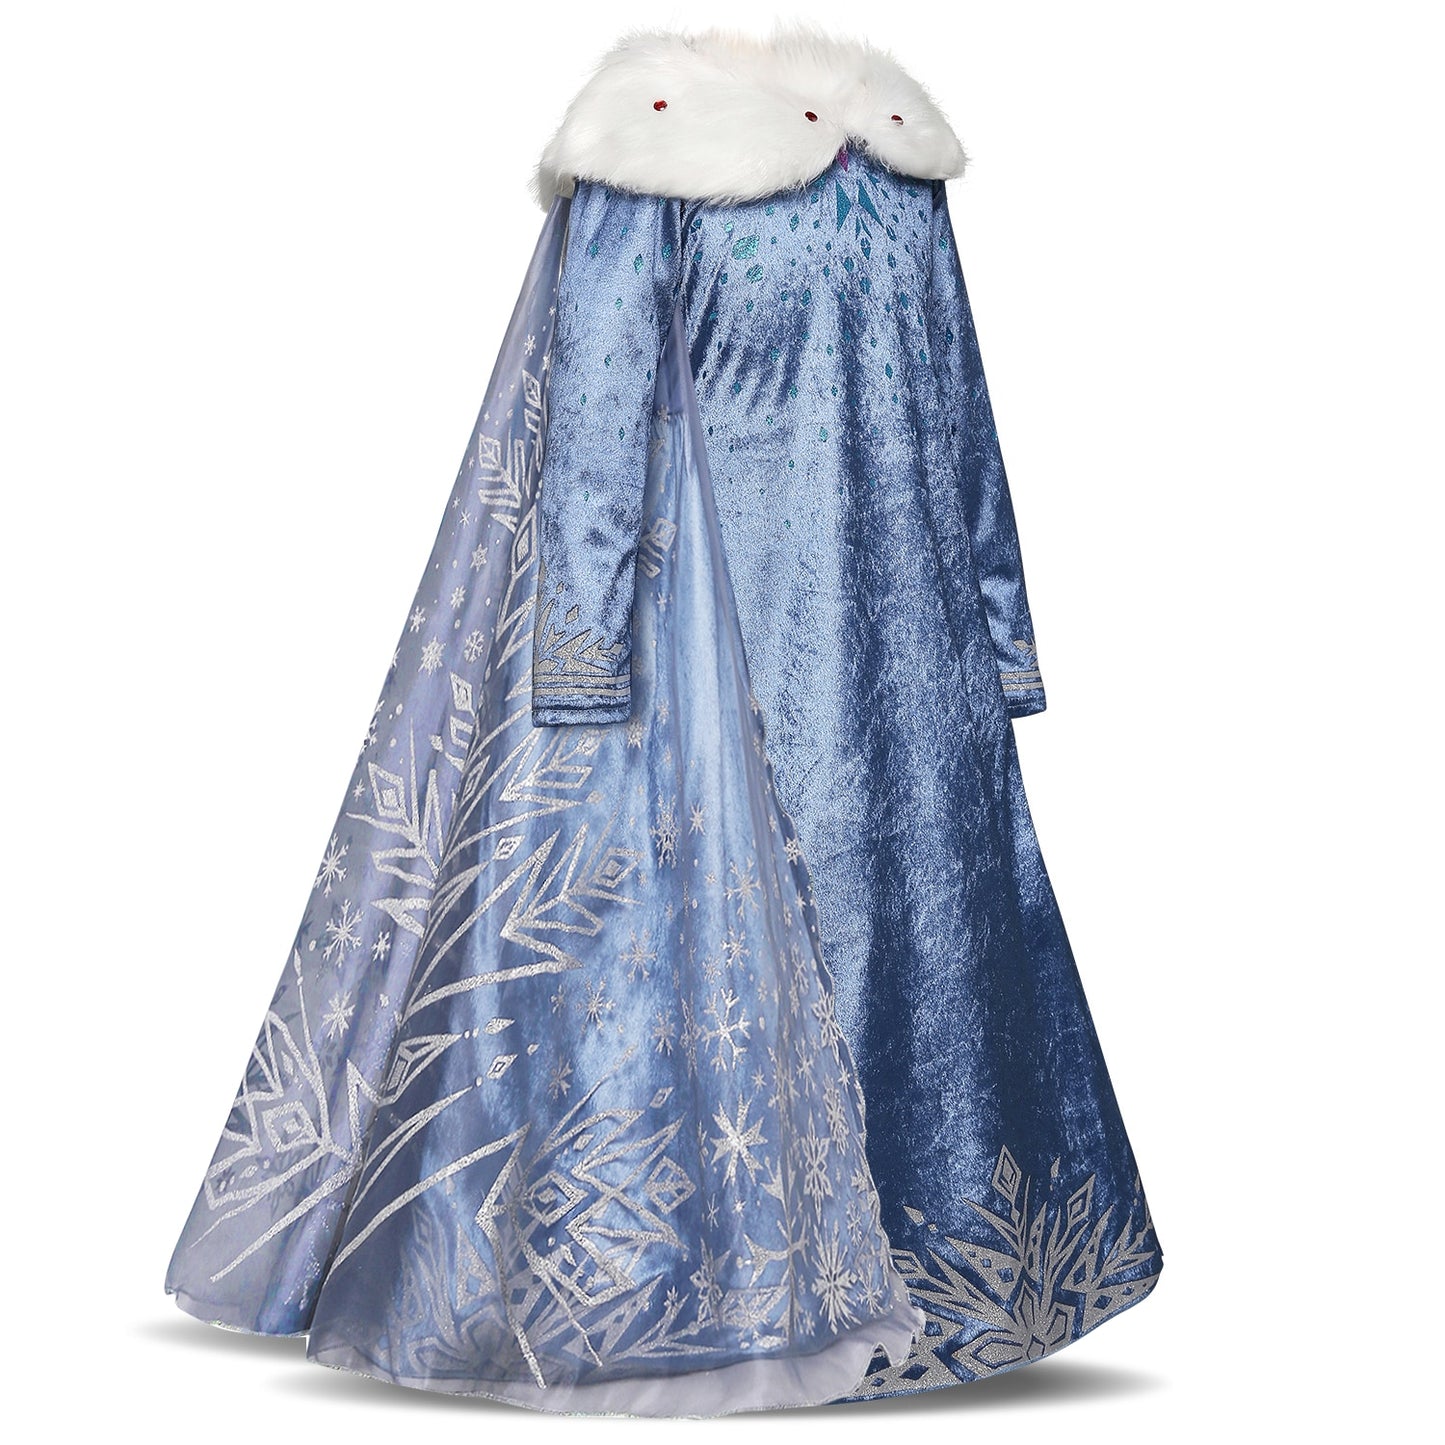 Girls Dress Children Role-Play Costume Gown